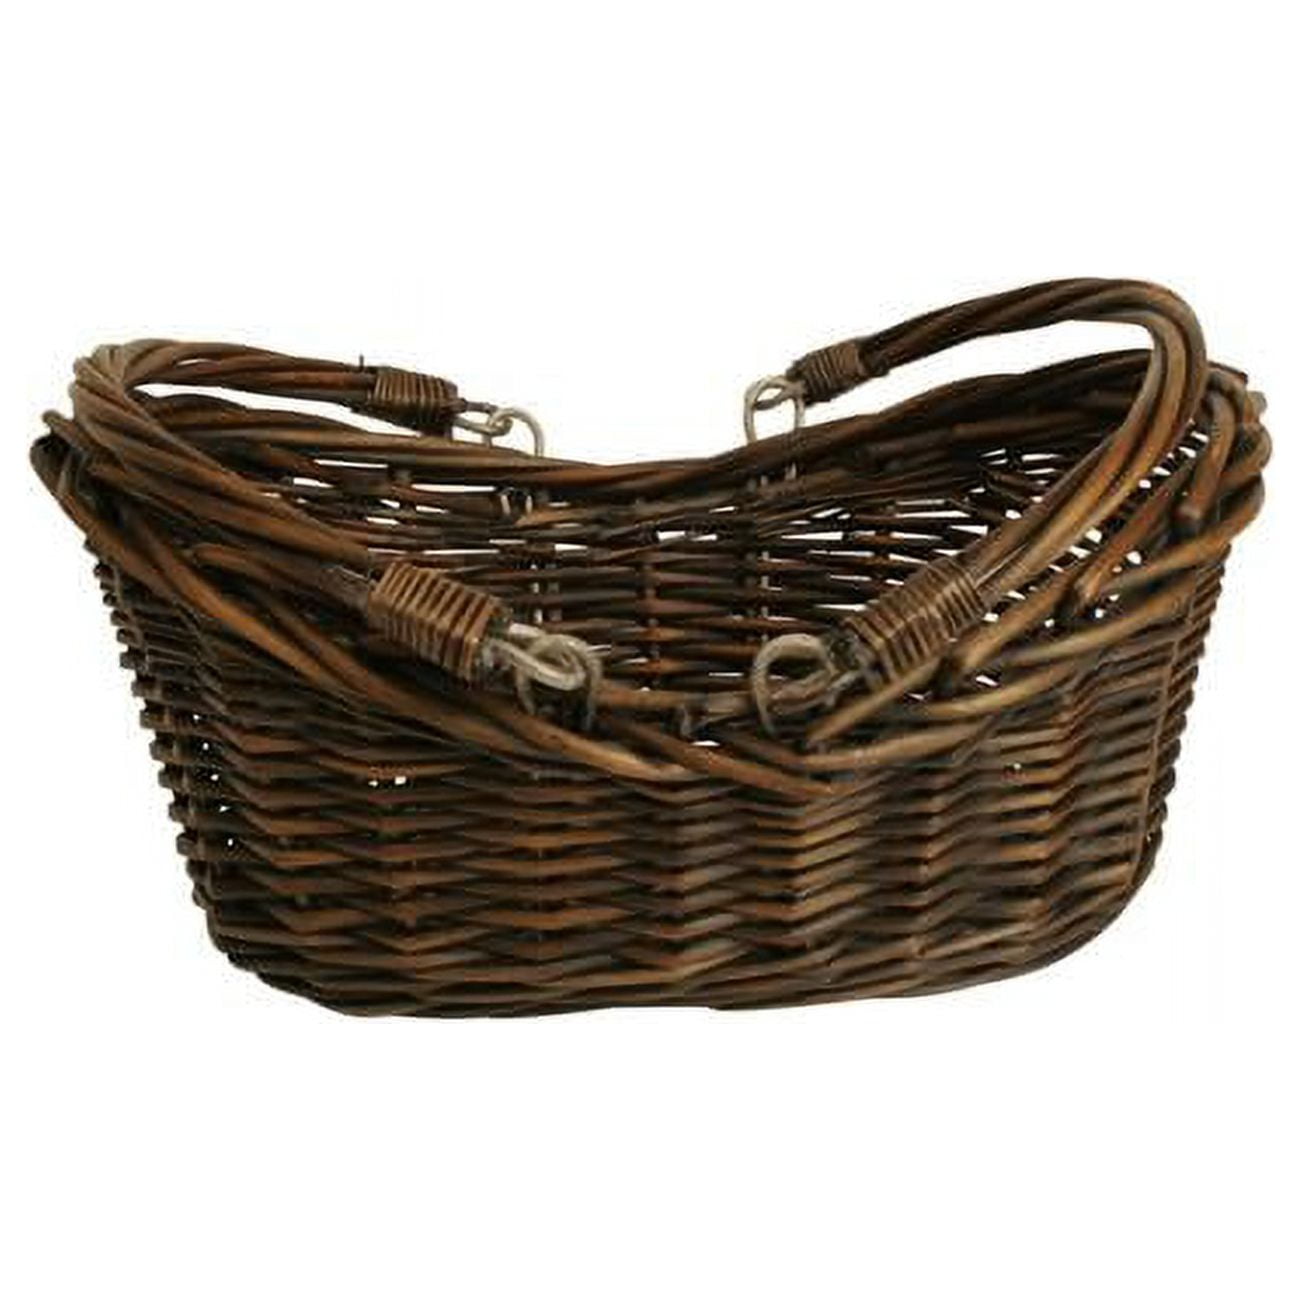 Wald Imports - Medium Light Brown Hand Woven Wicker Basket for Storage with  Handles - Woven Basket - Wicker Baskets for Picnics, Easter, Organizing